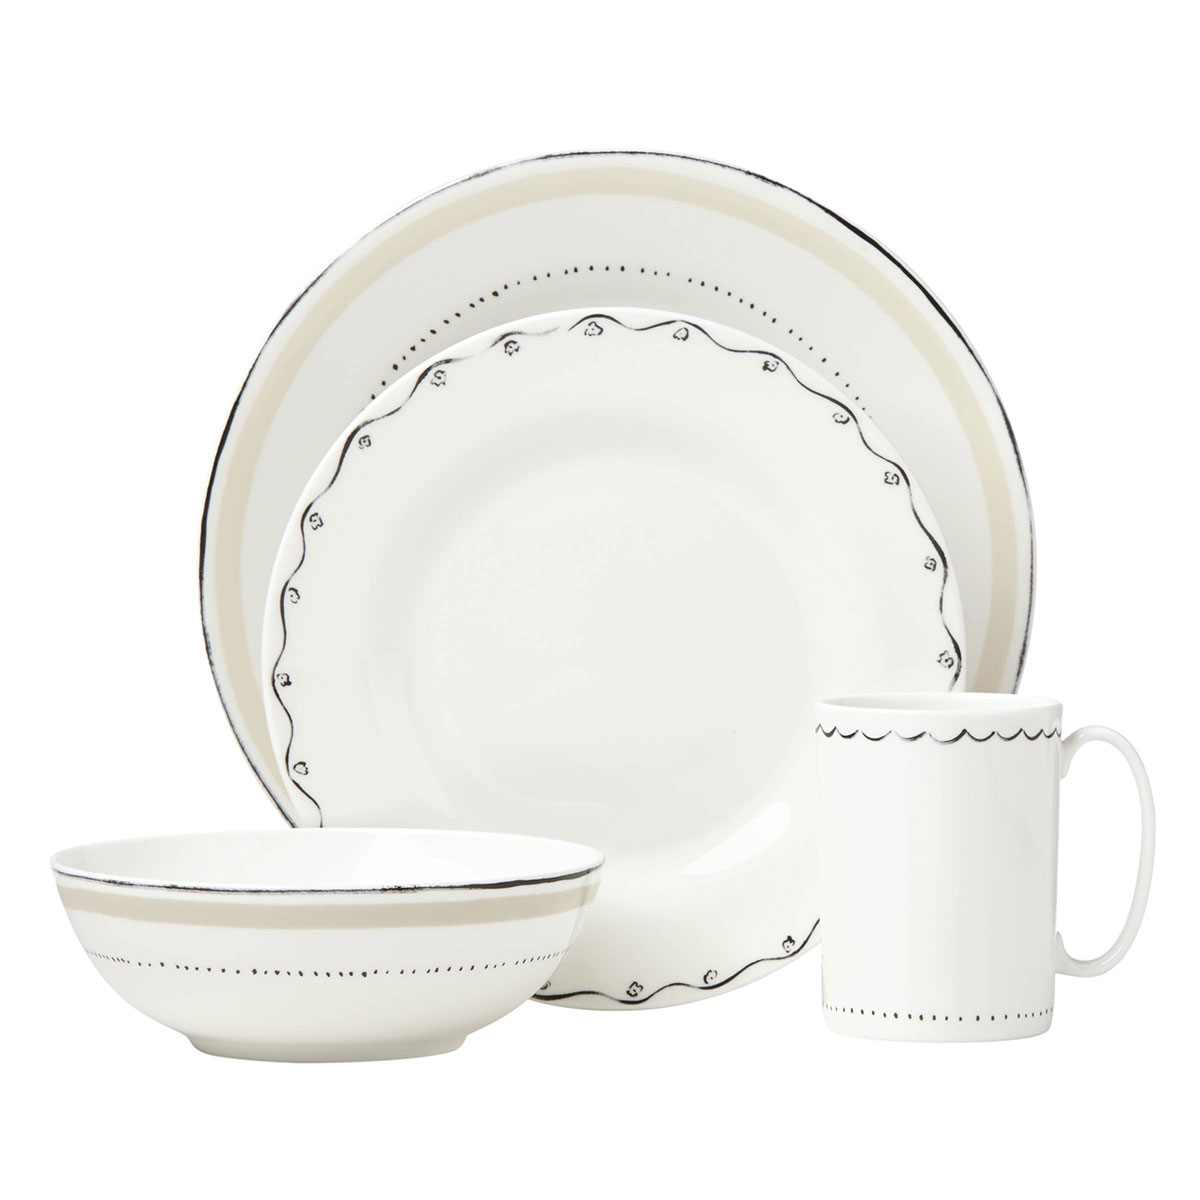 Kate Spade New York, Lenox Union Square Taupe 4 Piece Place Setting